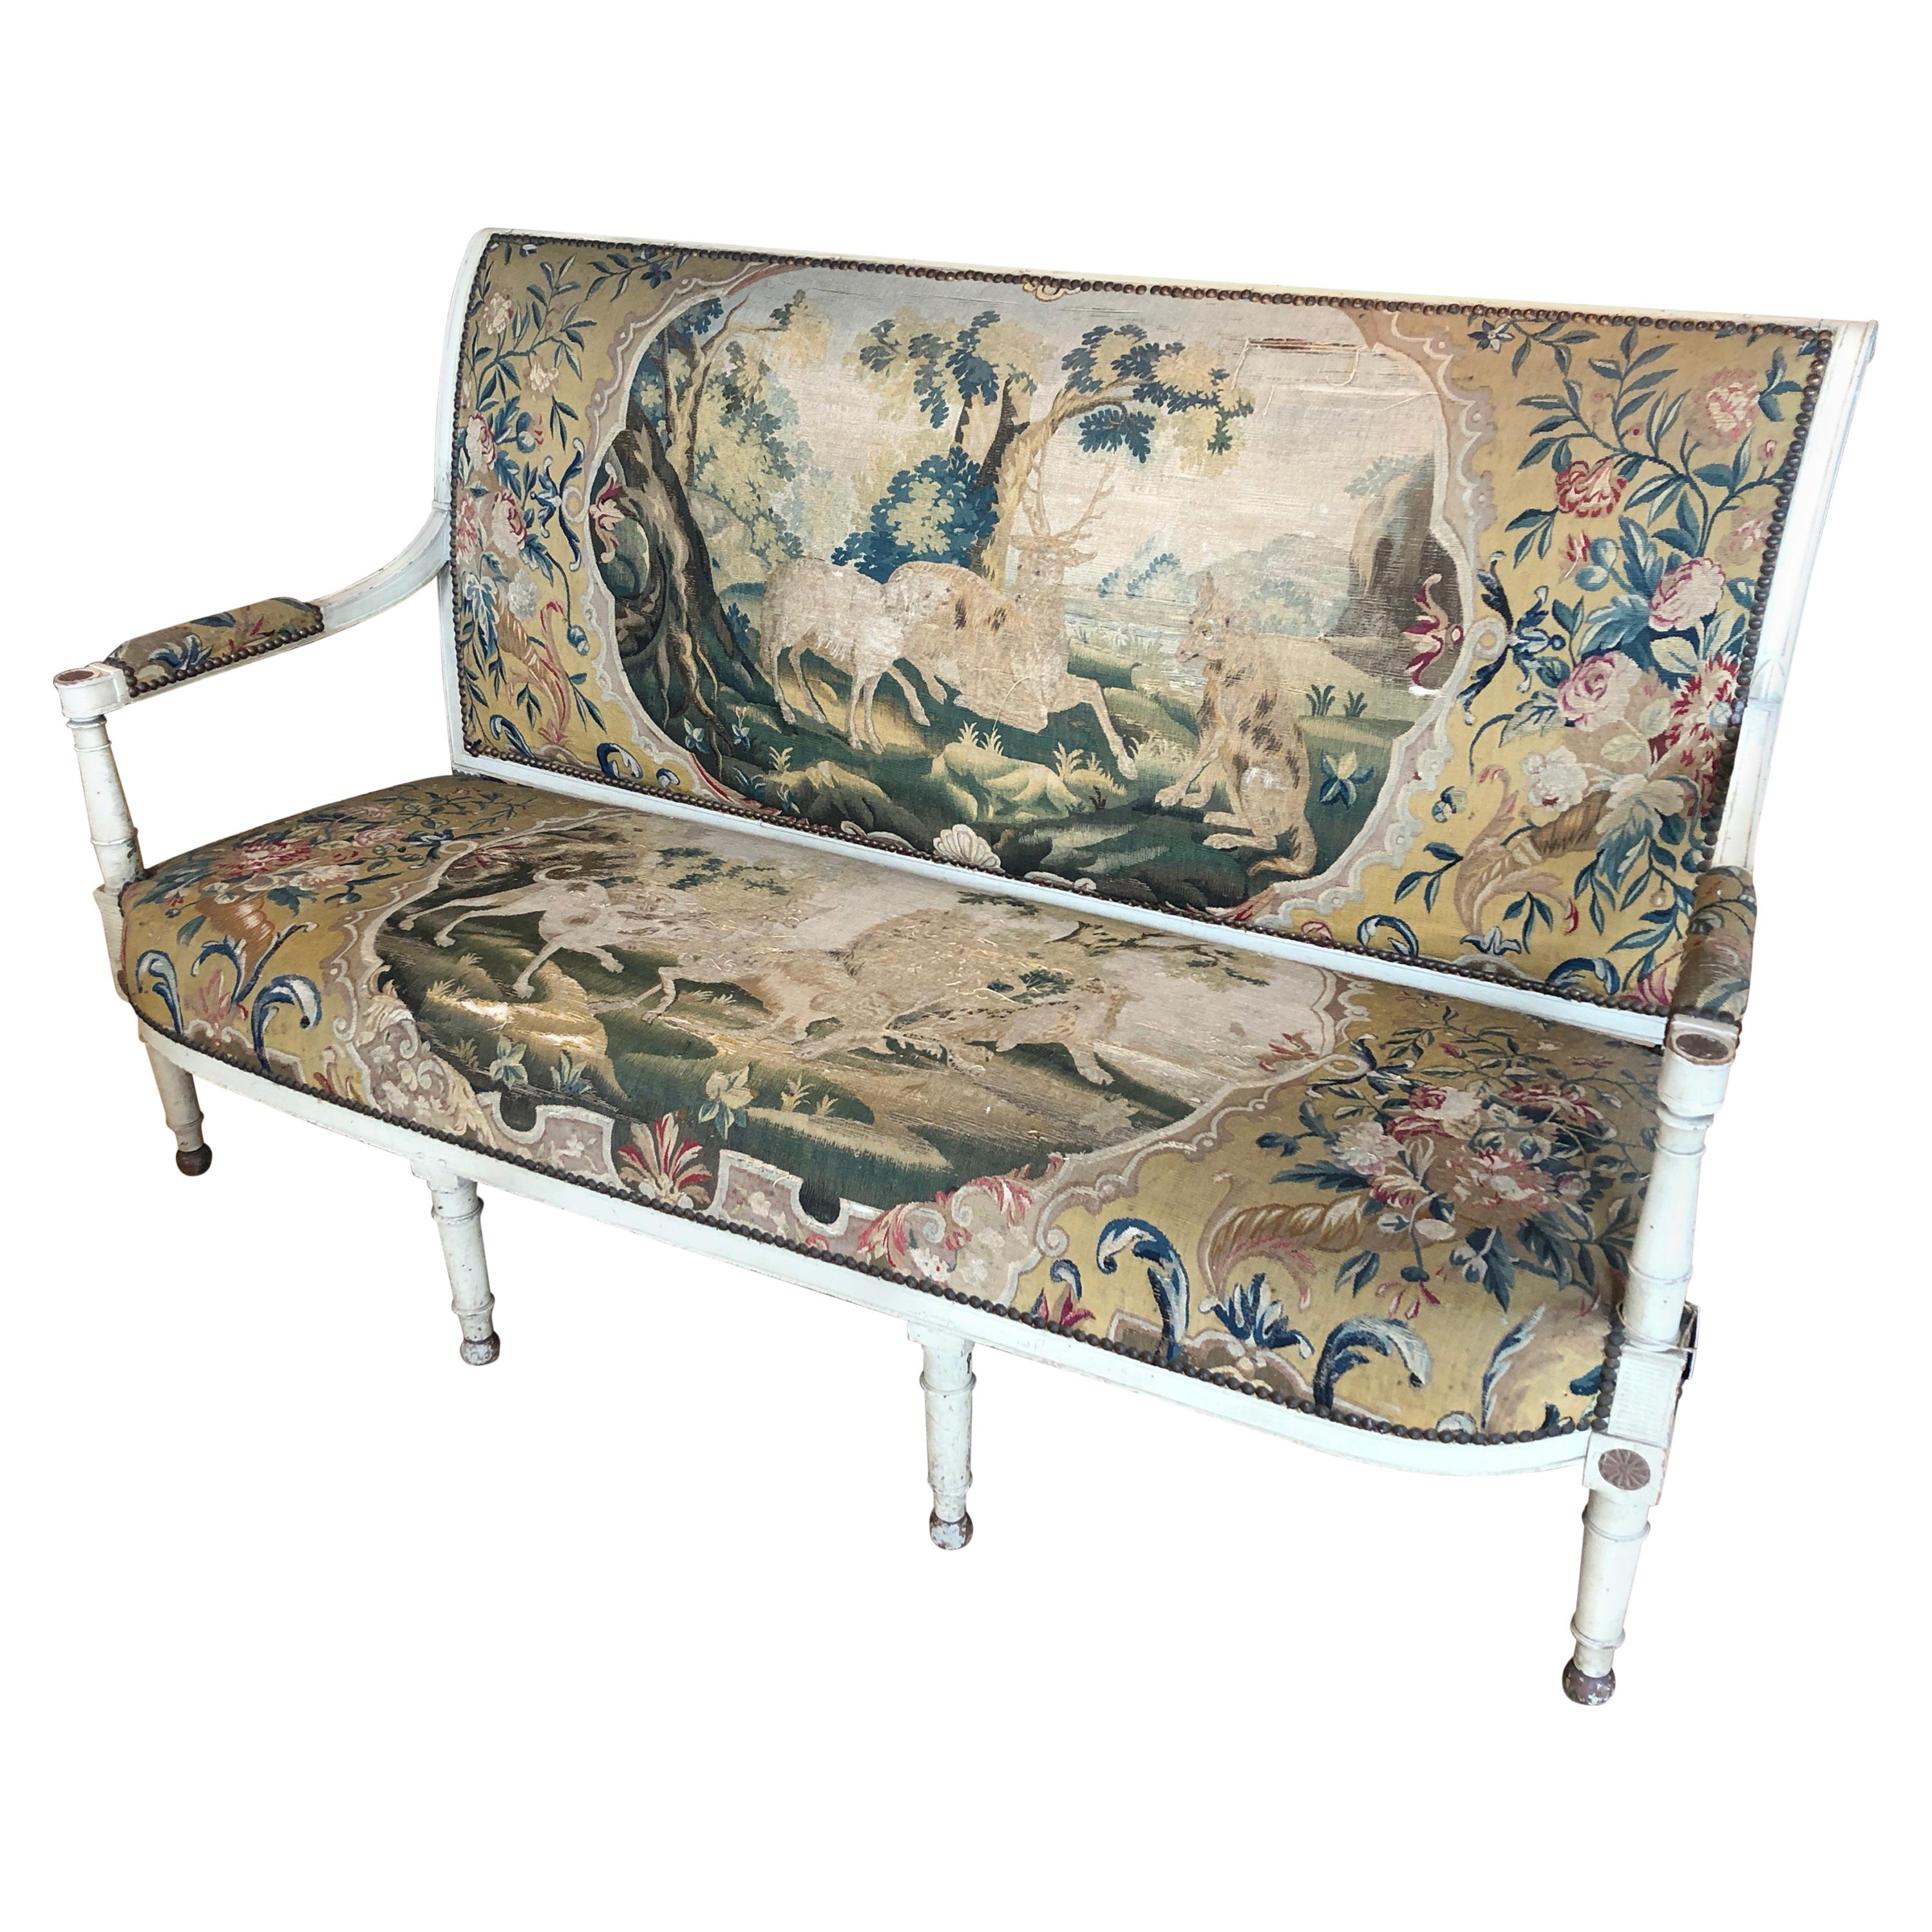 Supremely Pretty Whitewashed Antique French Settee with Original Tapestry